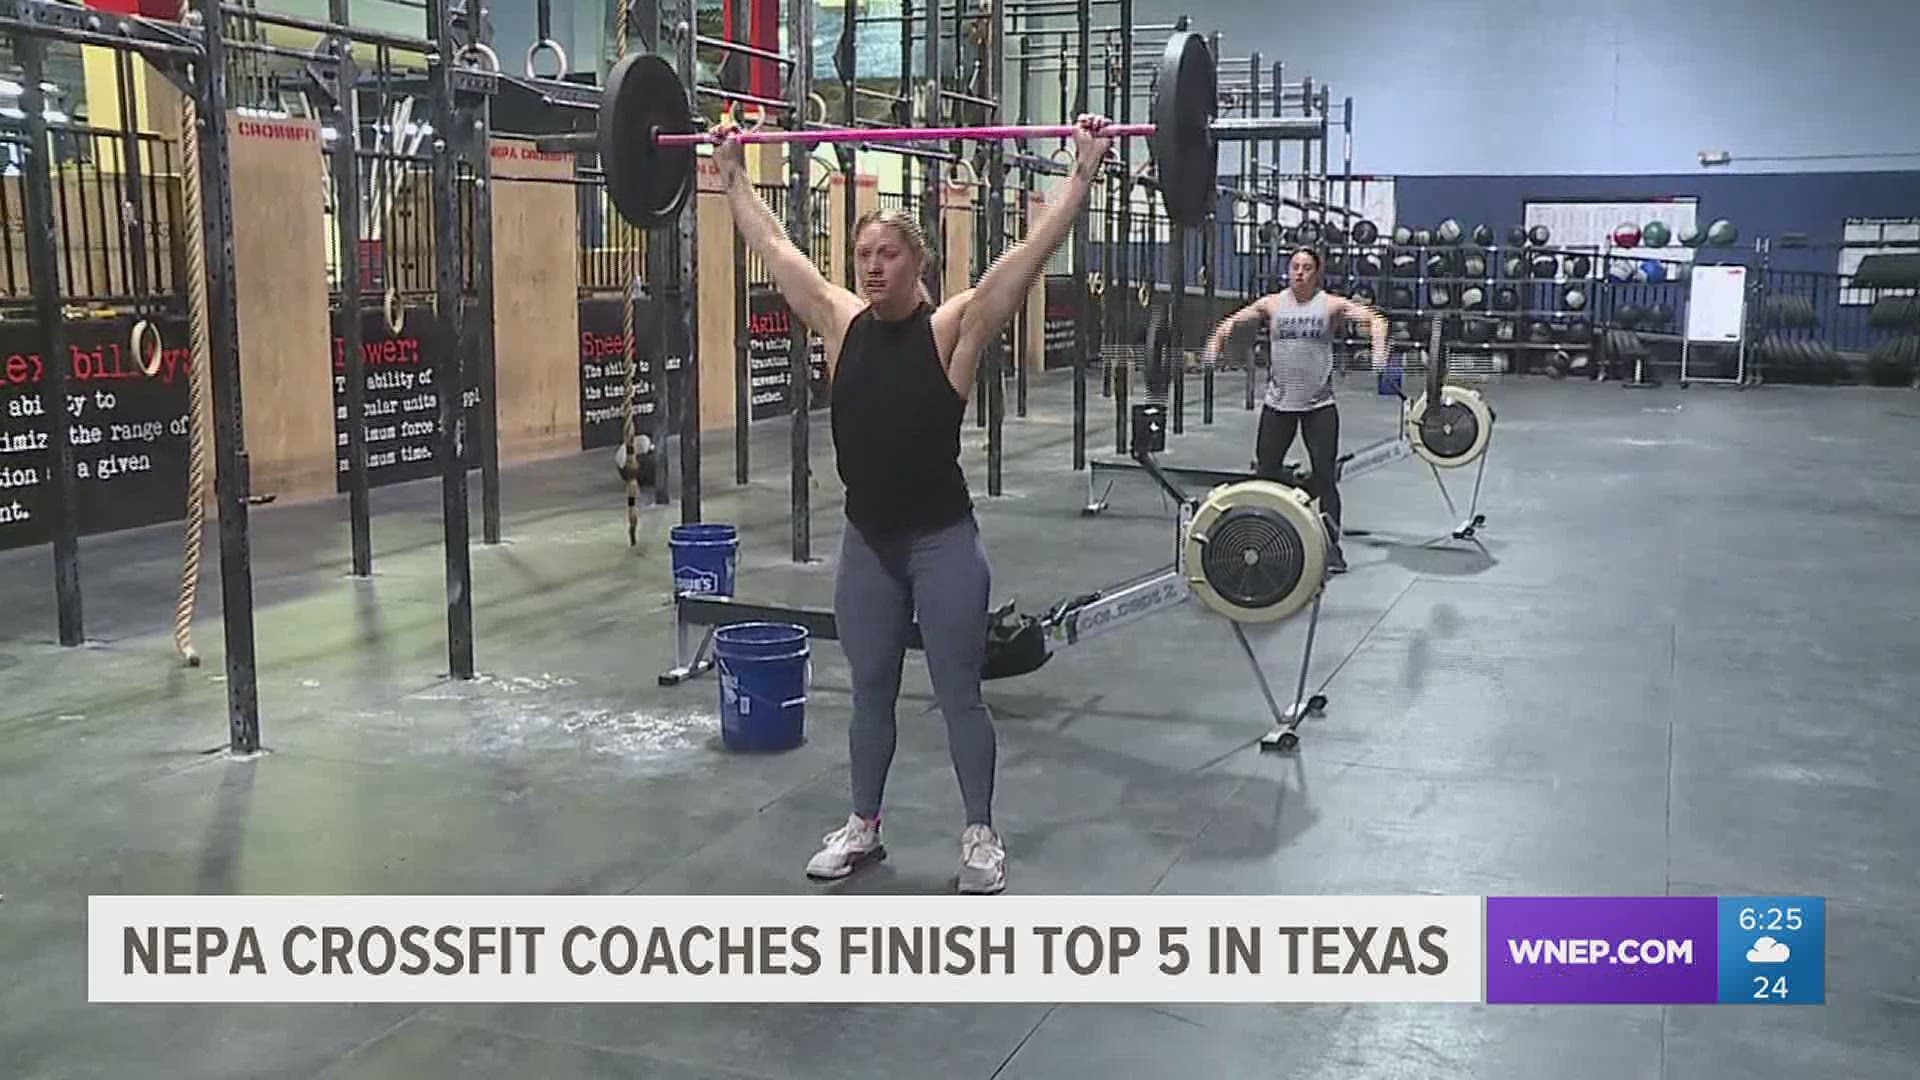 NEPA CrossFit from Luzerne County has two women finish in the top five in a tournament in Austin, Texas.